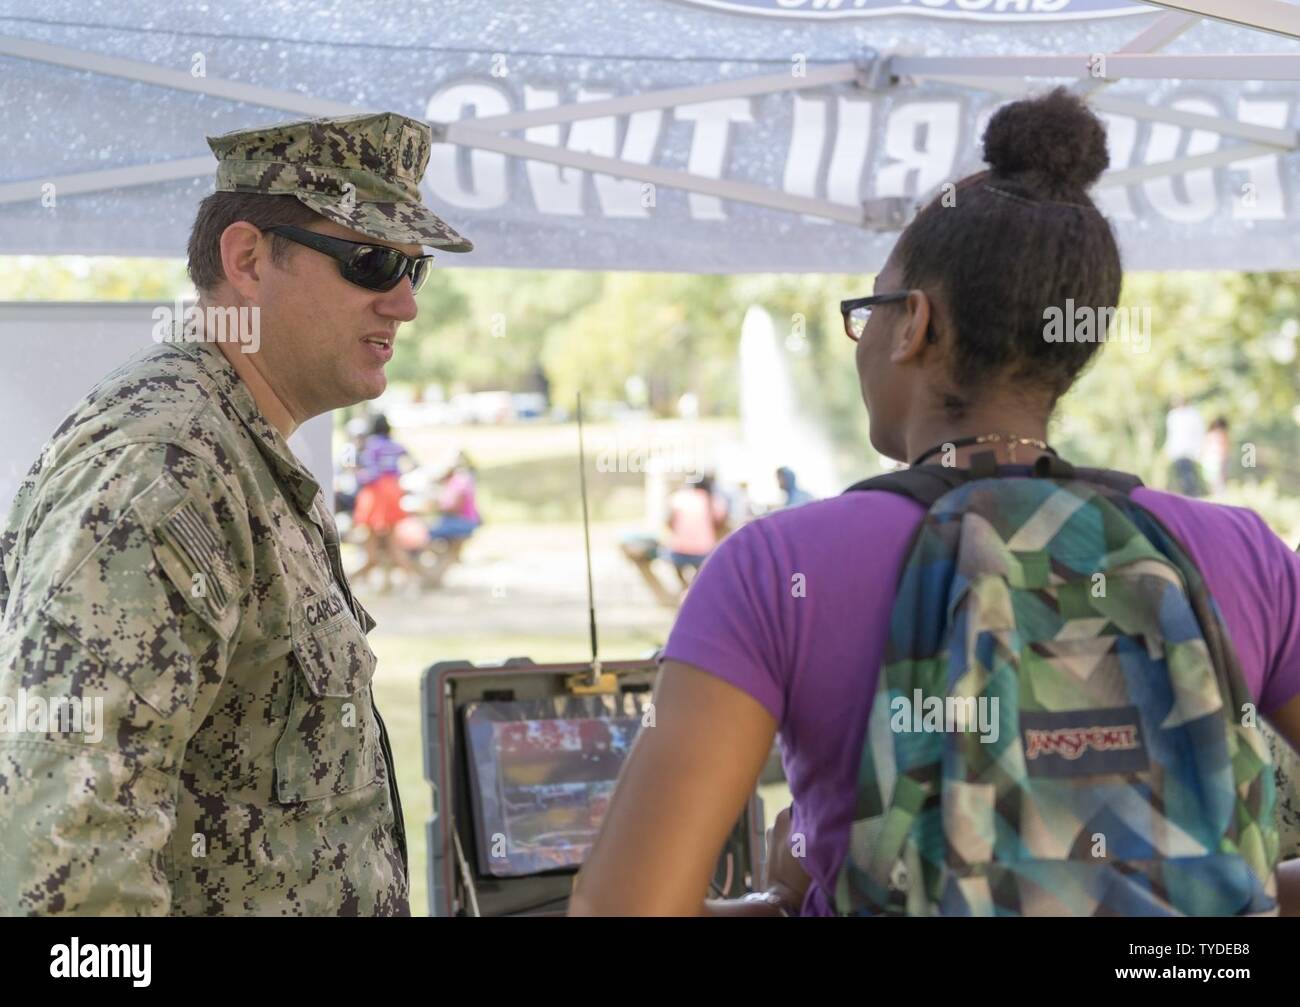 BATON ROUGE, La. (Nov. 2, 2016) Senior Chief Petty Officer Steve Carlson, assigned to Explosive Ordnance Disposal Group (EODGRU) 2, explains the mission of Navy EOD to a student during a visit to Southern University and A&M College as part of Baton Rouge Navy Week 2016. Baton Rouge is one of select cities to host the 2016 Navy Week, a week dedicated to raising U.S. Navy awareness through local outreach, community service and exhibitions. Stock Photo